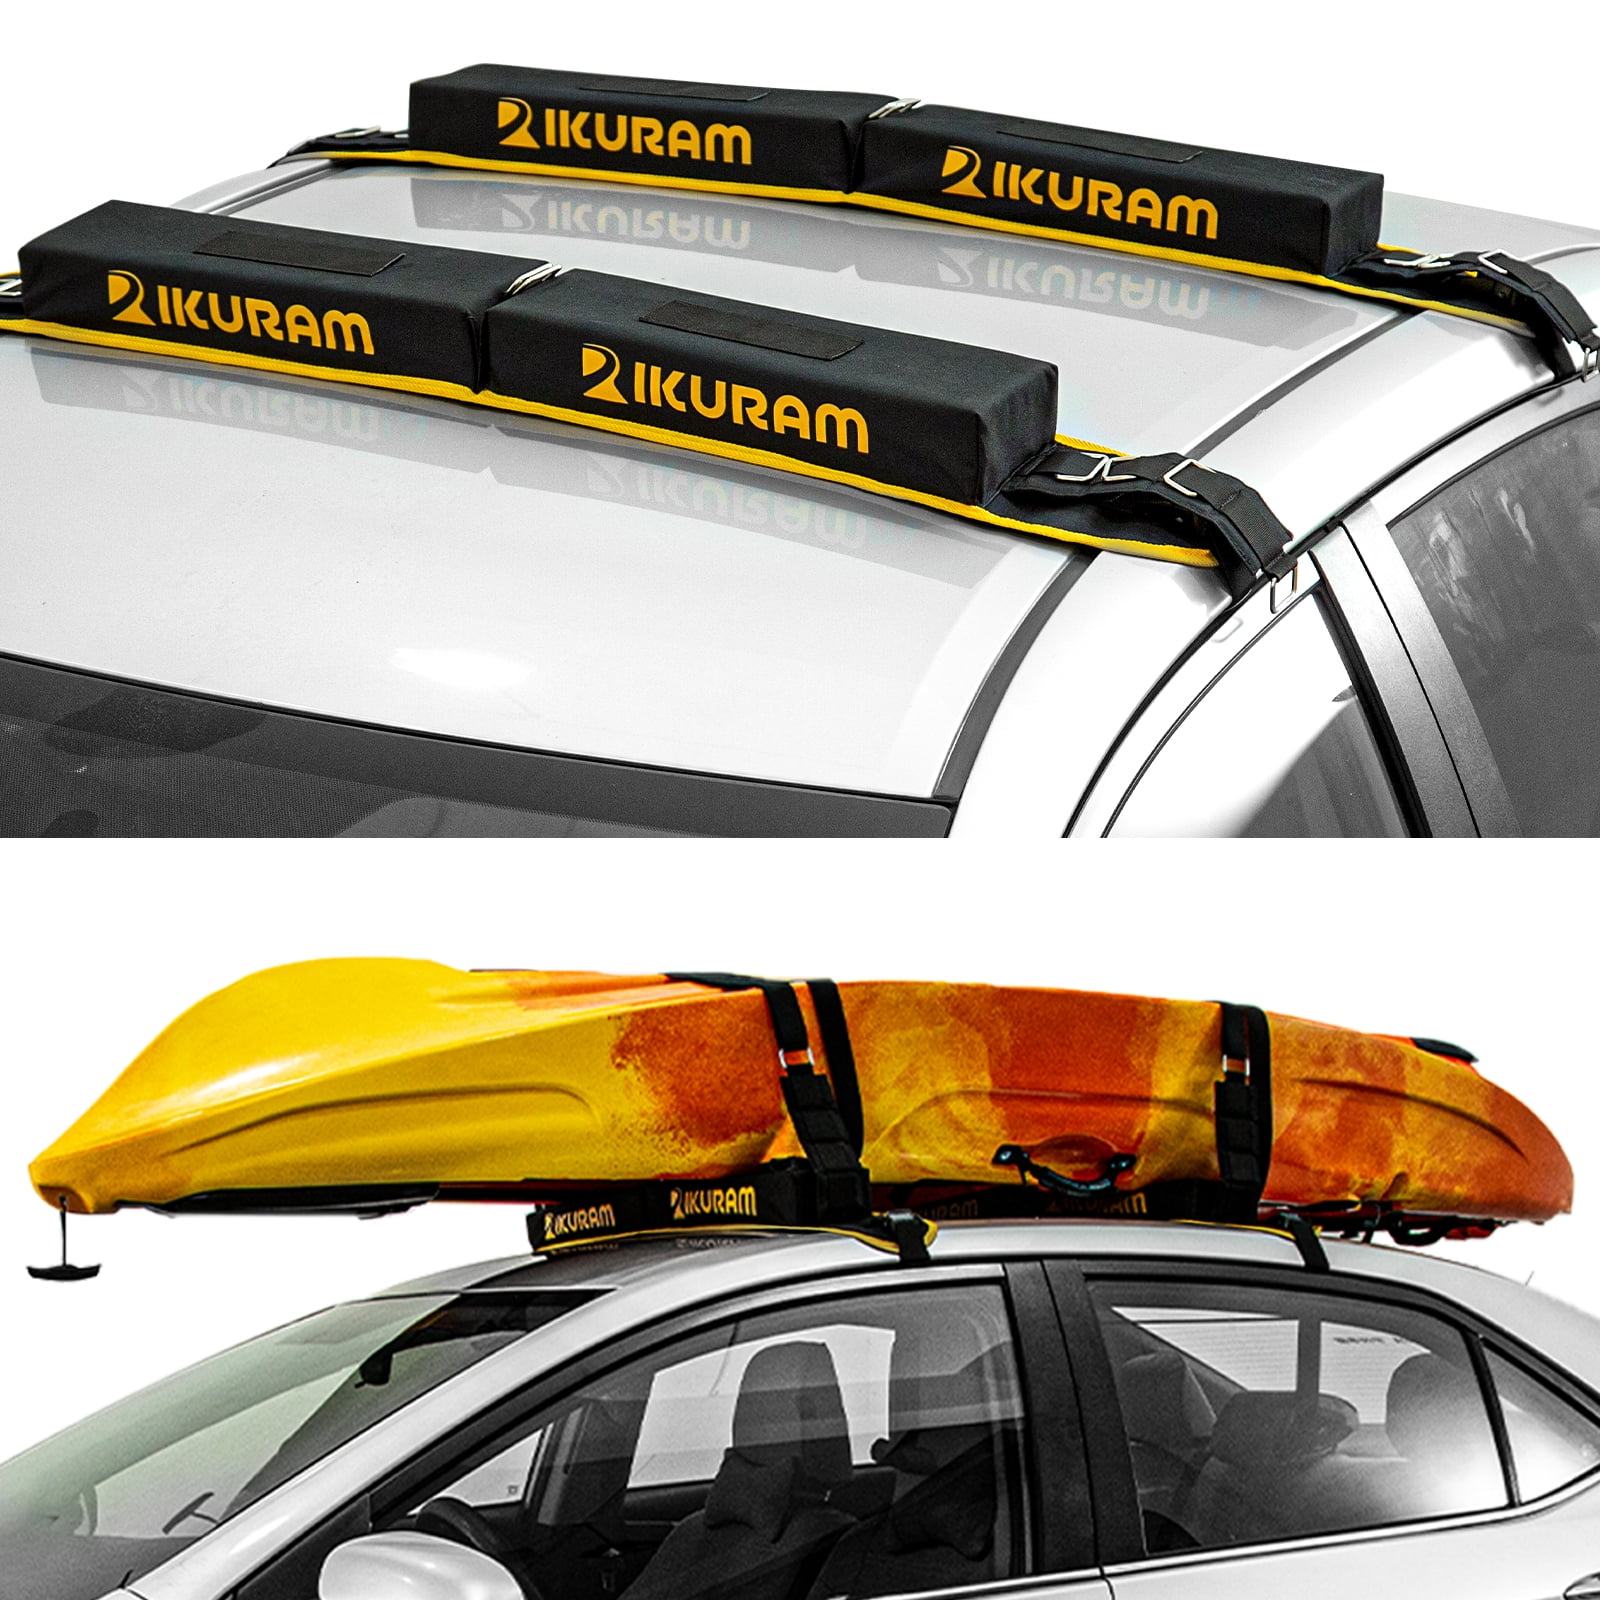 Vexplo Soft Kayak Roof Rack for Car Kayak Surfboard Roof Rack, Removable  Car Canoe SUP Ladders Carrier Rack with Sturdy Tie Down Systems